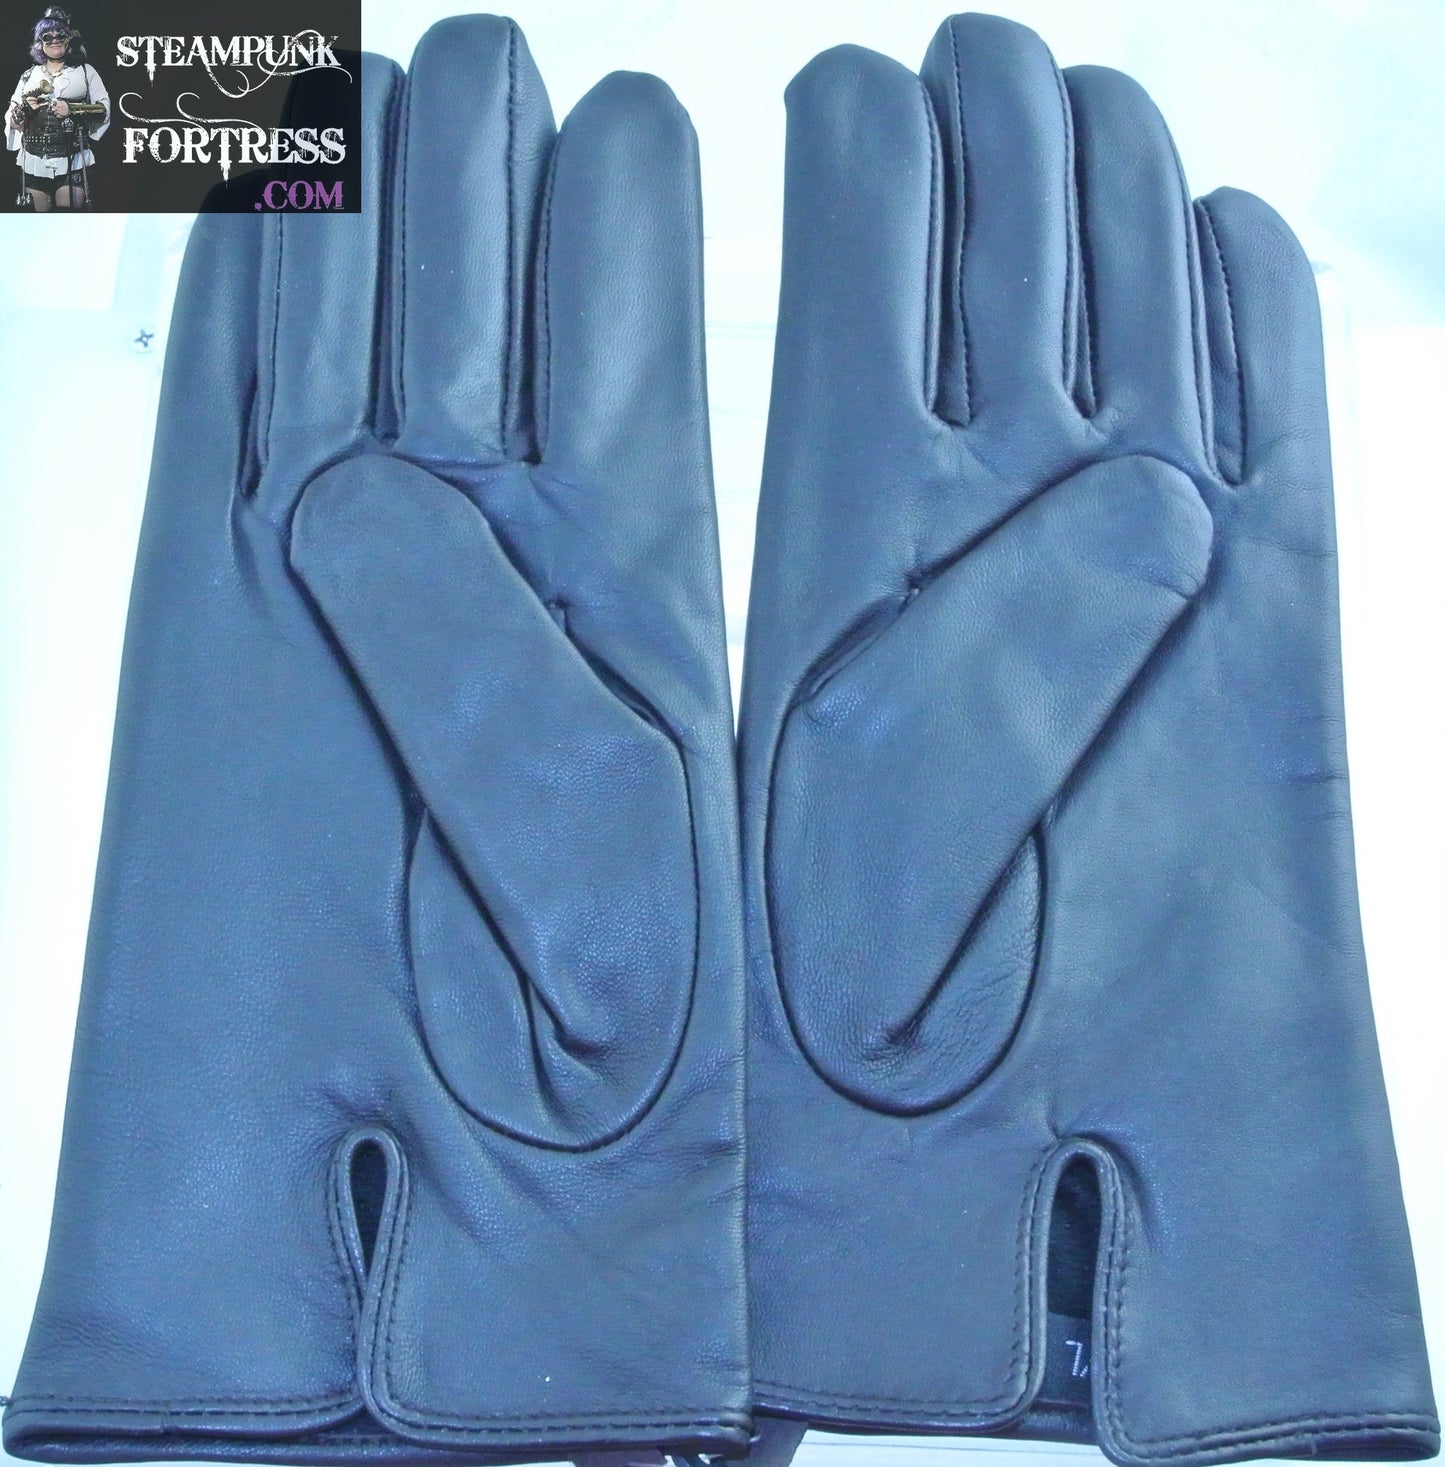 NEW DARK BROWN NEARLY BLACK LEATHER GLOVES MEDIUM LARGE REDFISH - MASS PRODUCED